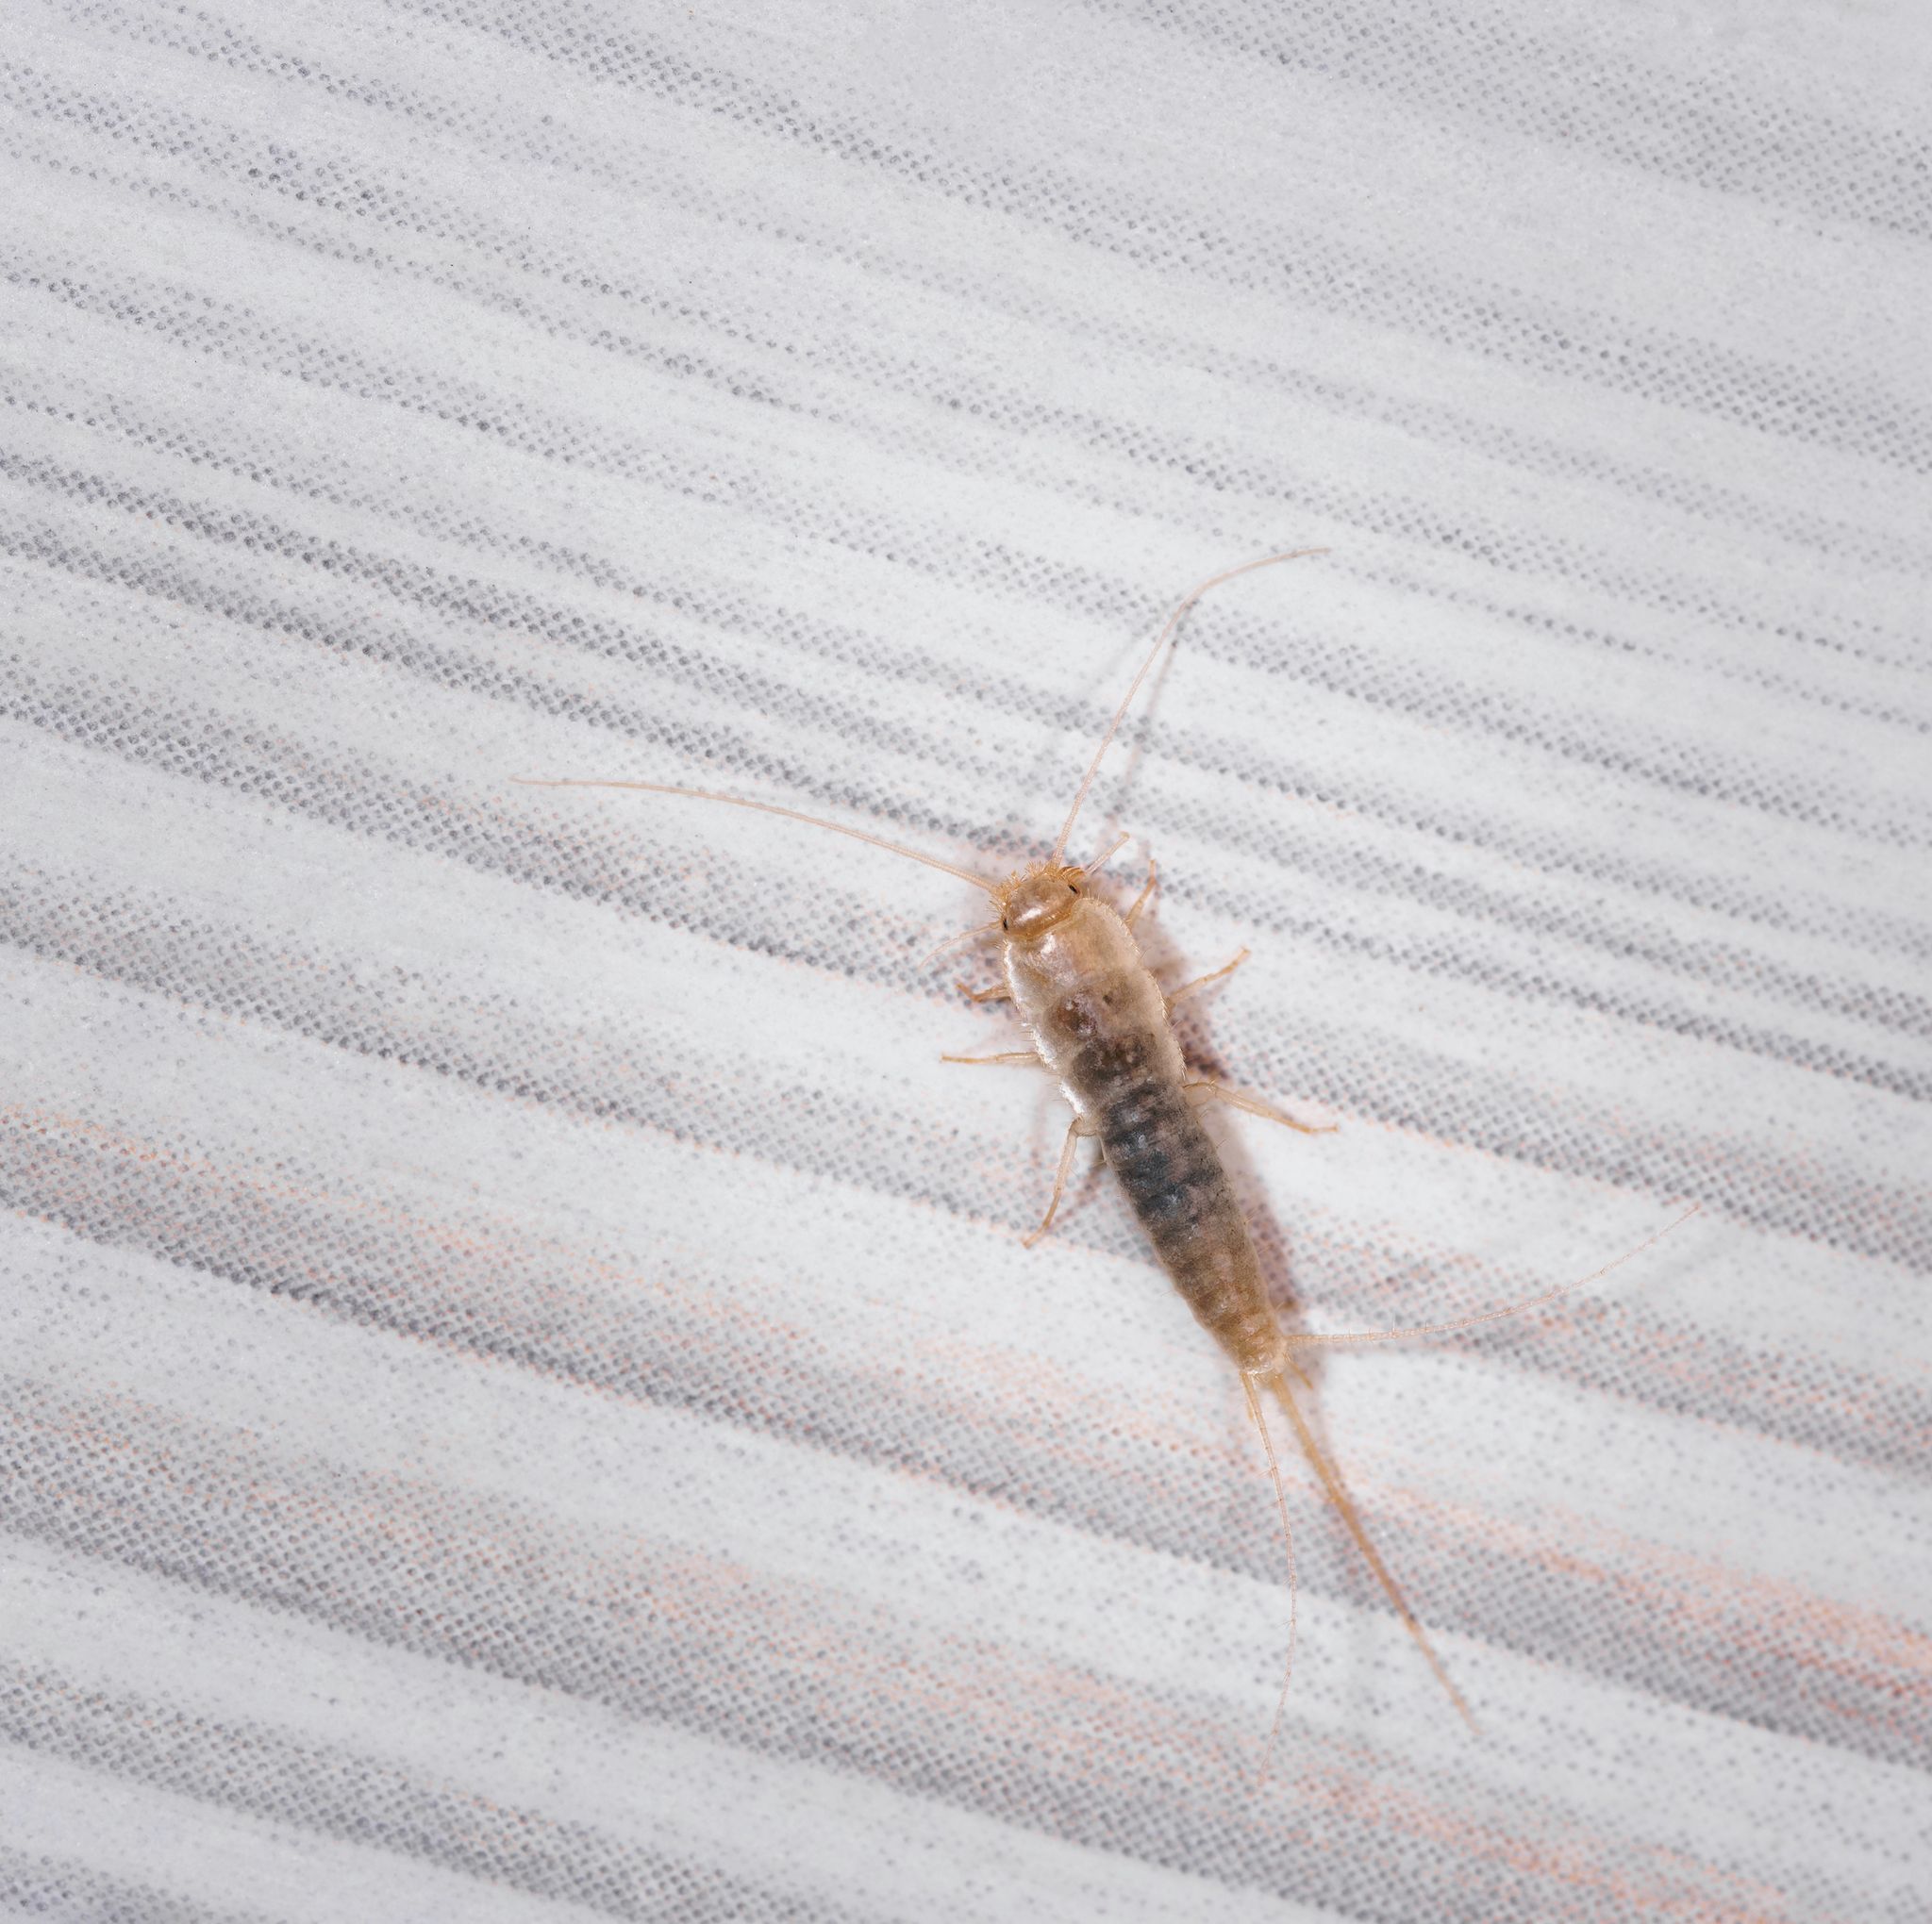 Tiny Bugs in Bathroom: Get Rid of Them with These Effective Solutions